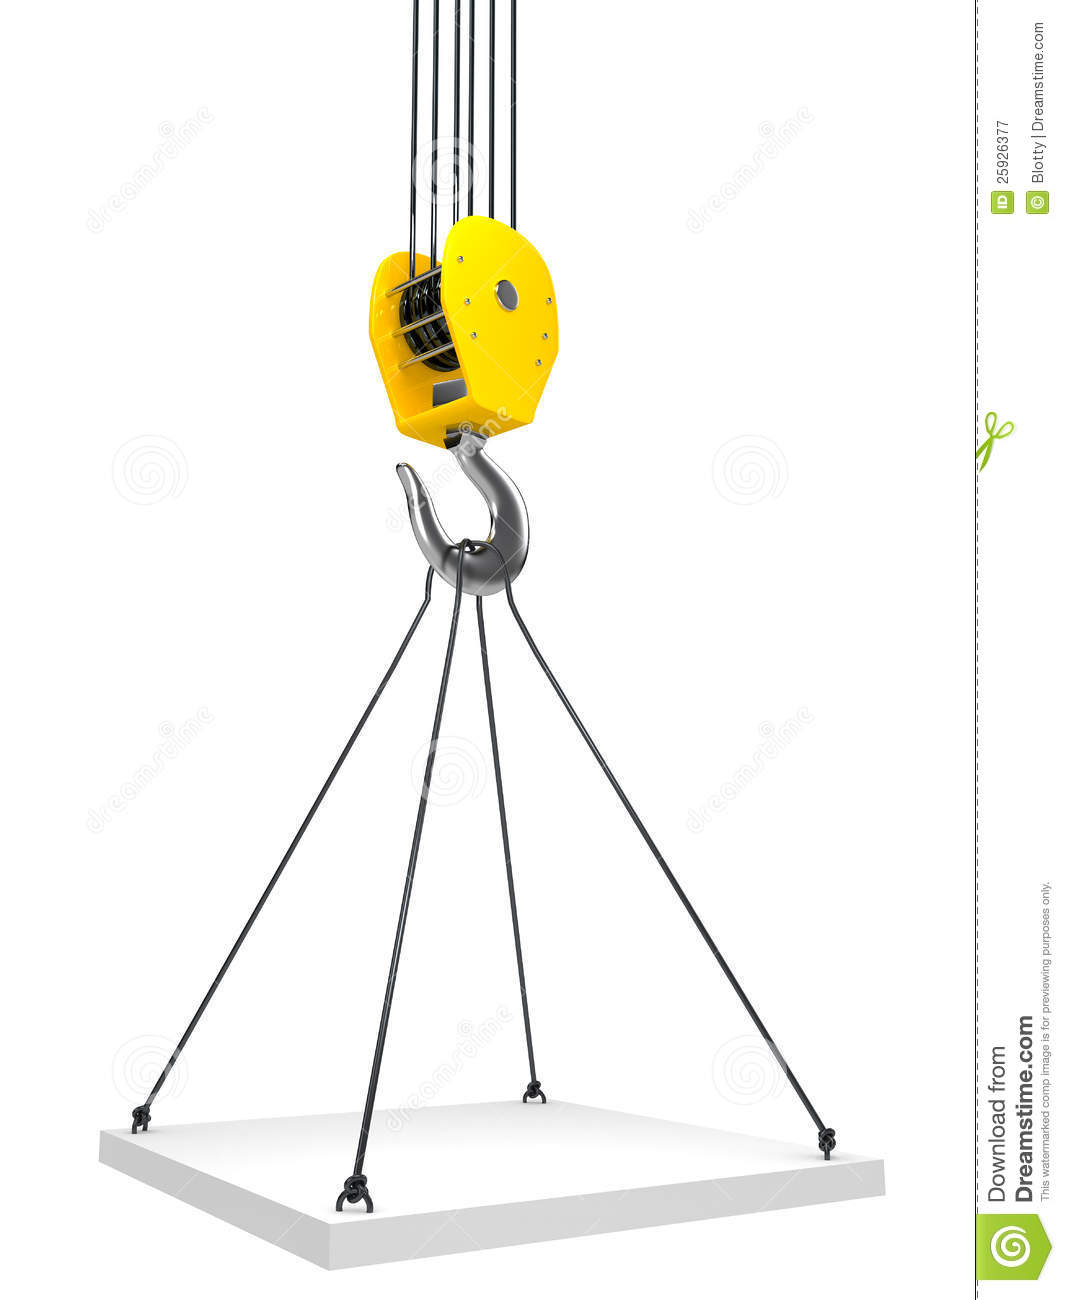 Industrial Hook Hanging On A Chain Royalty Free Stock Photography